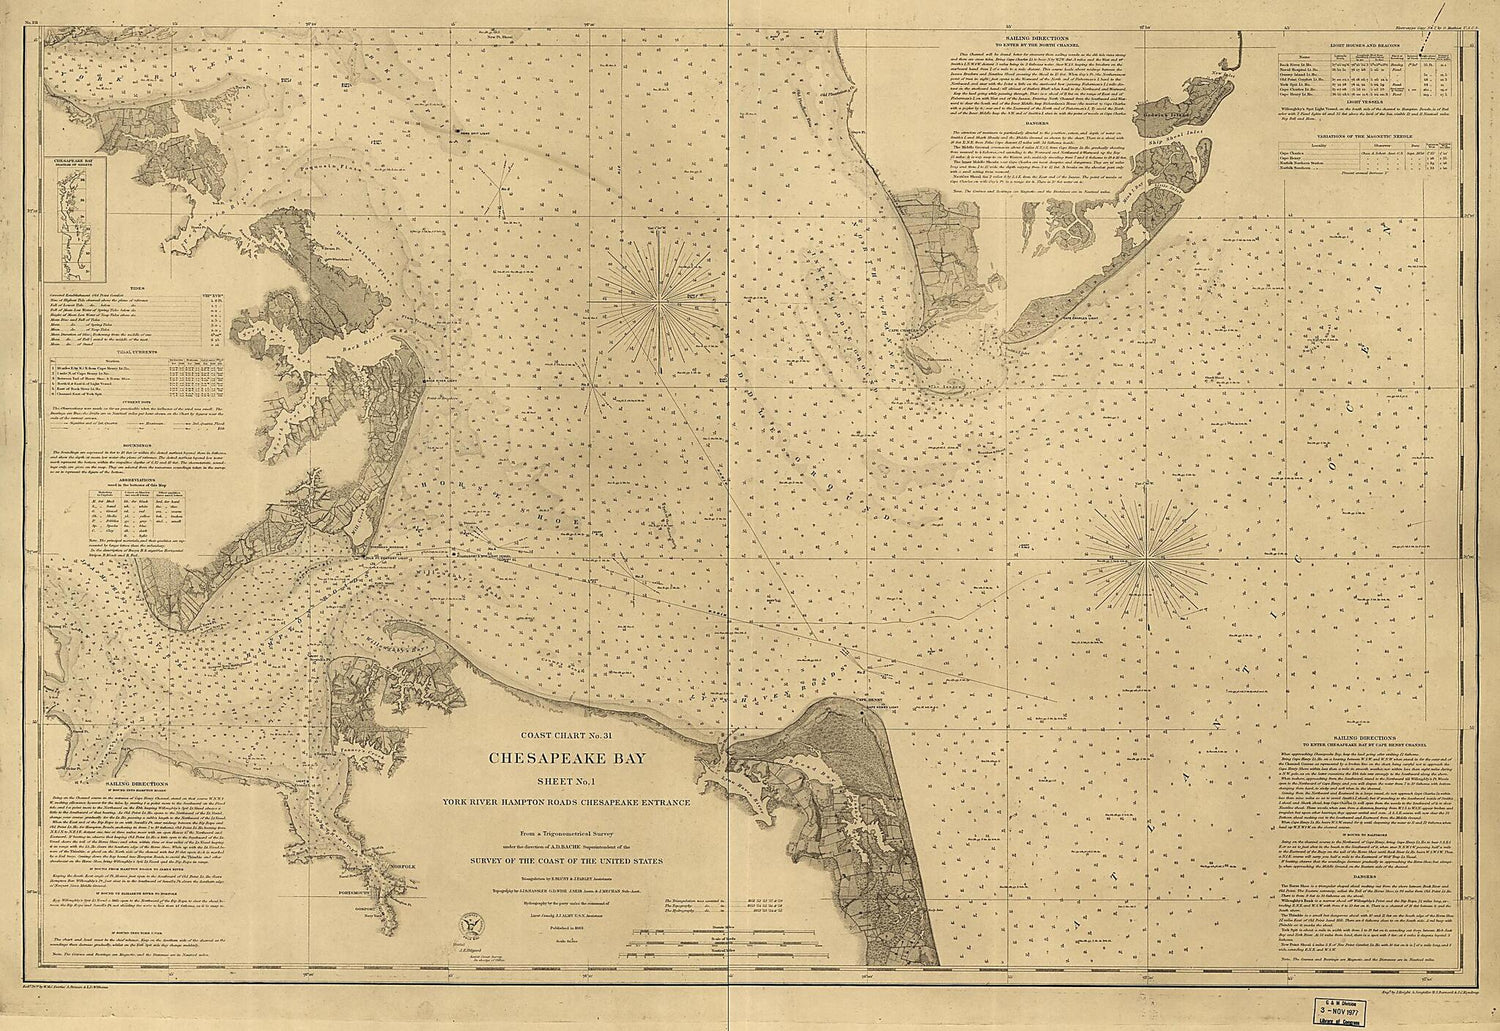 This old map of Chesapeake Bay, Sheet No. 1, York River, Hampton Roads, Chesapeake Entrance from 1863 was created by  United States Coast Survey in 1863